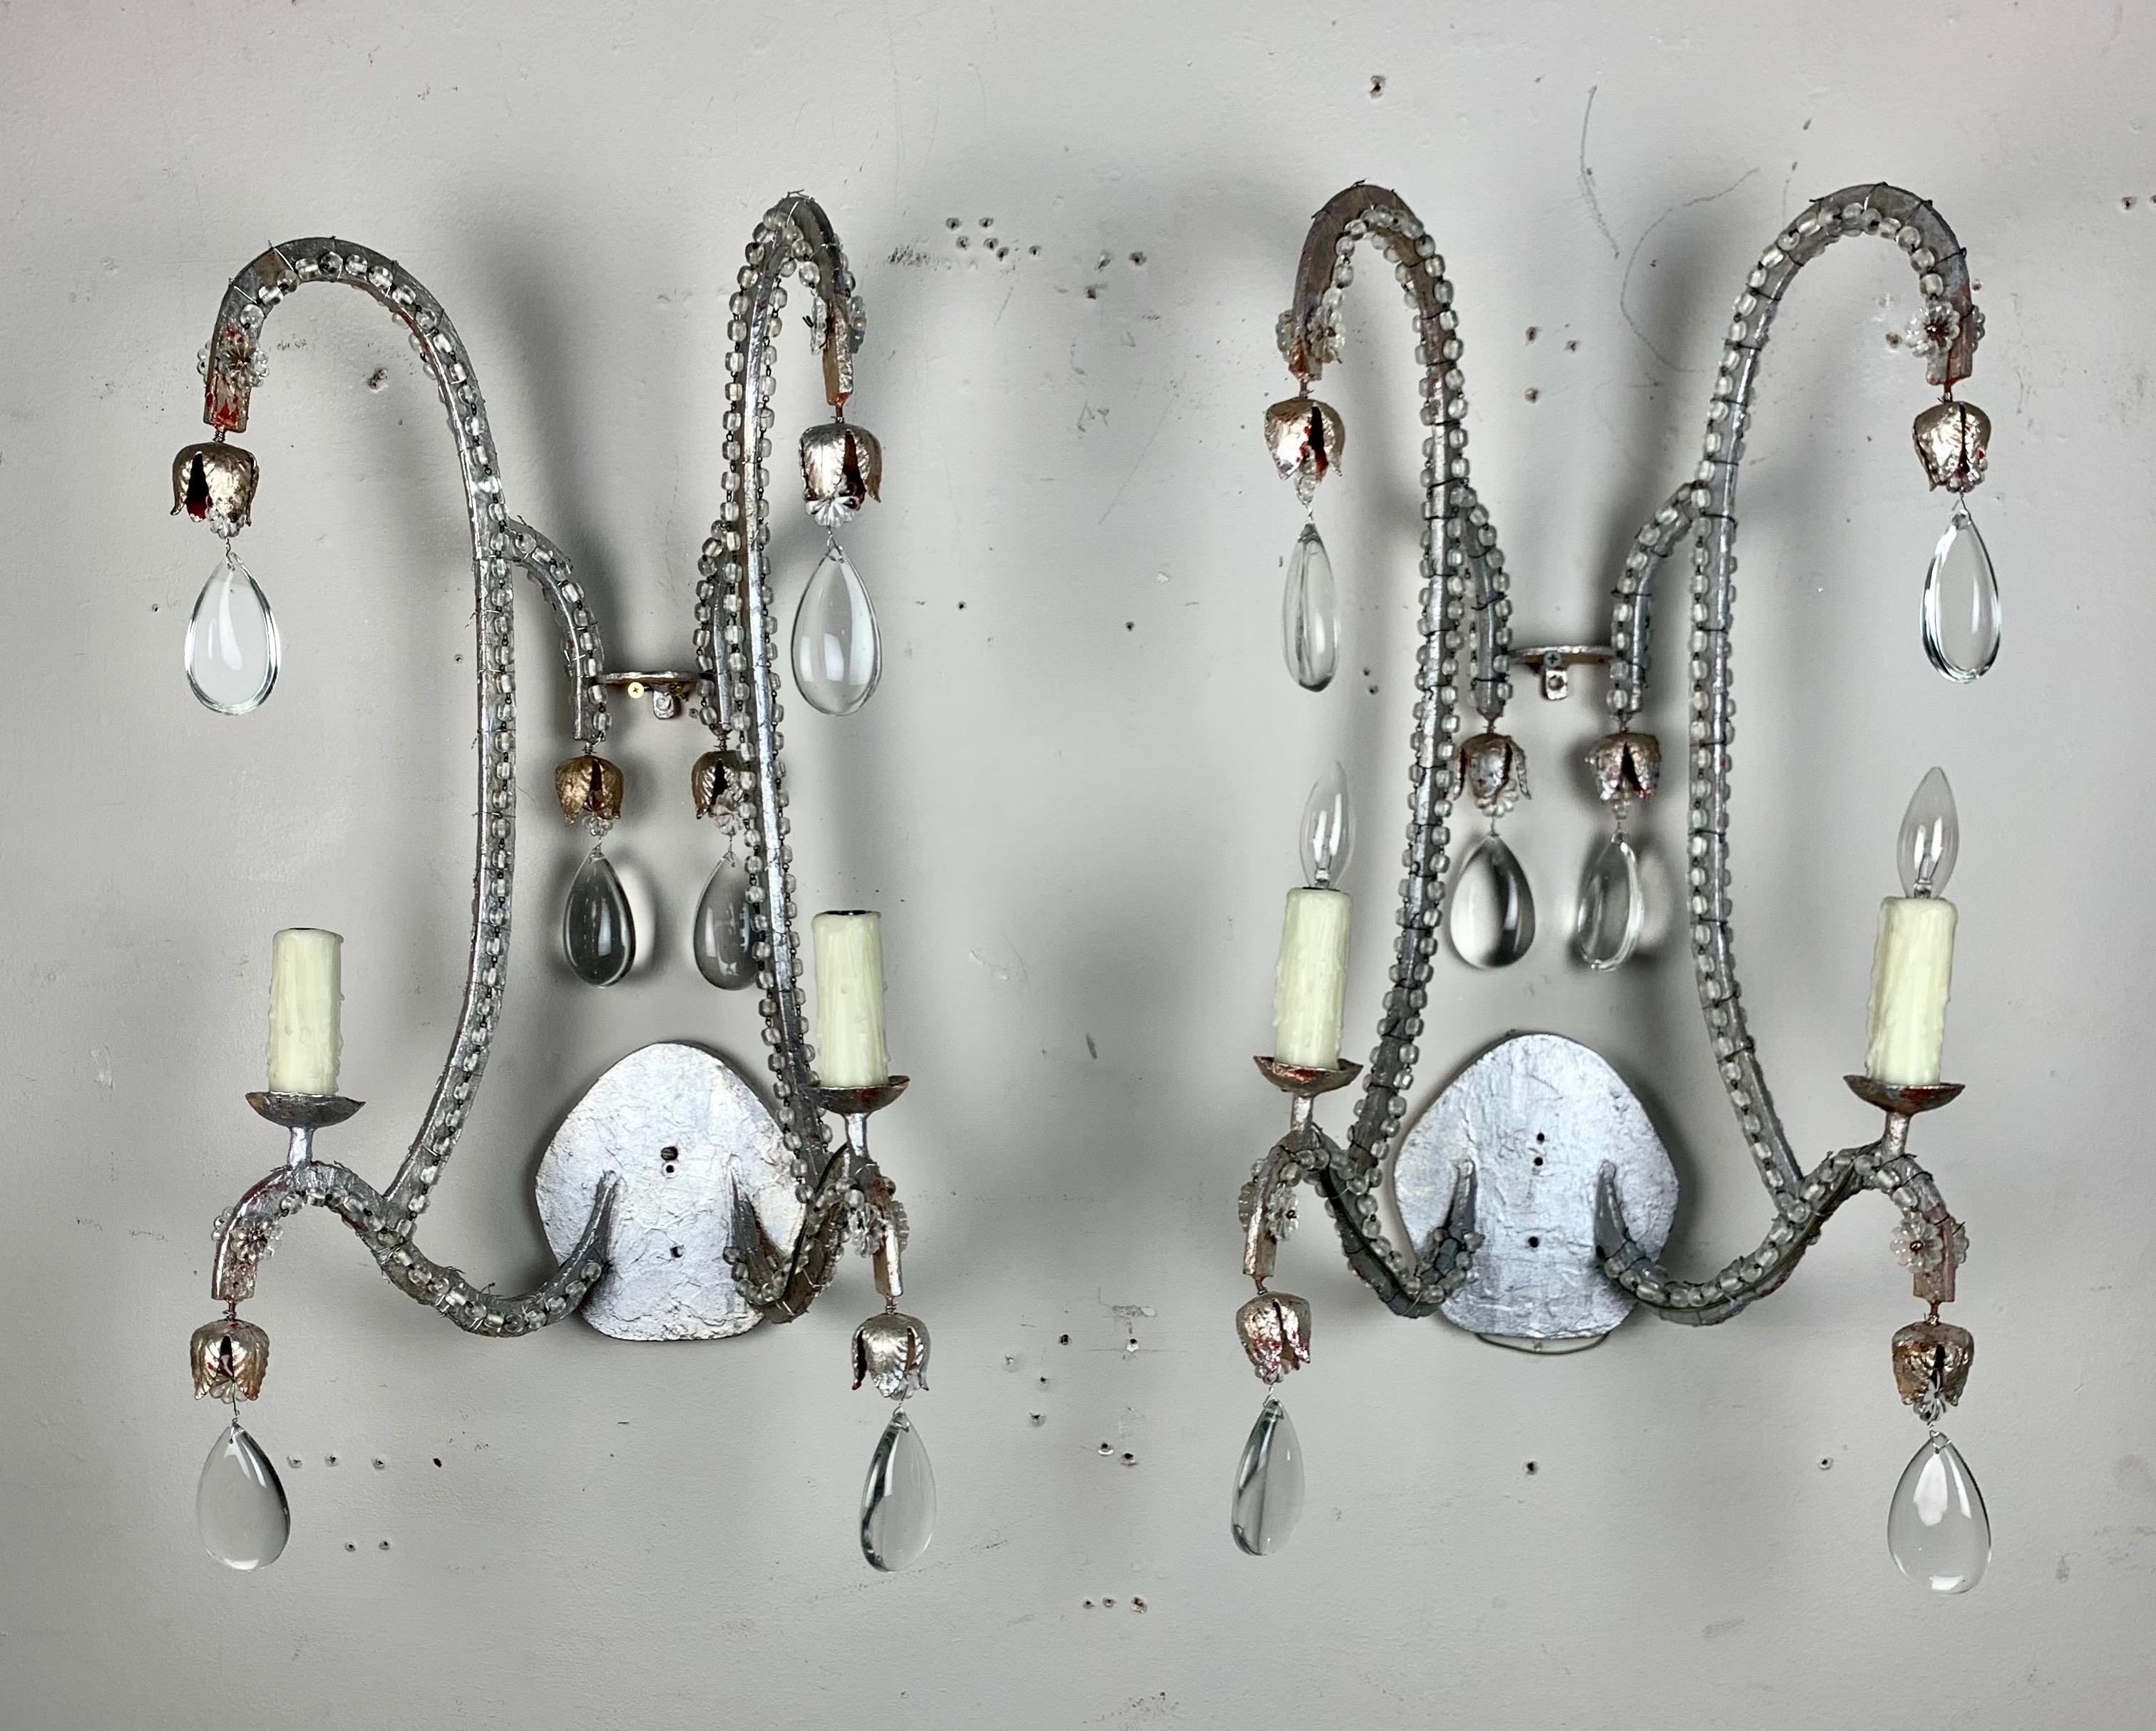 Pair of Italian silvered crystal beaded two light sconces. The sconces are newly rewired with drip wax candle covers. Clear almond shaped crystals can be seen throughout.